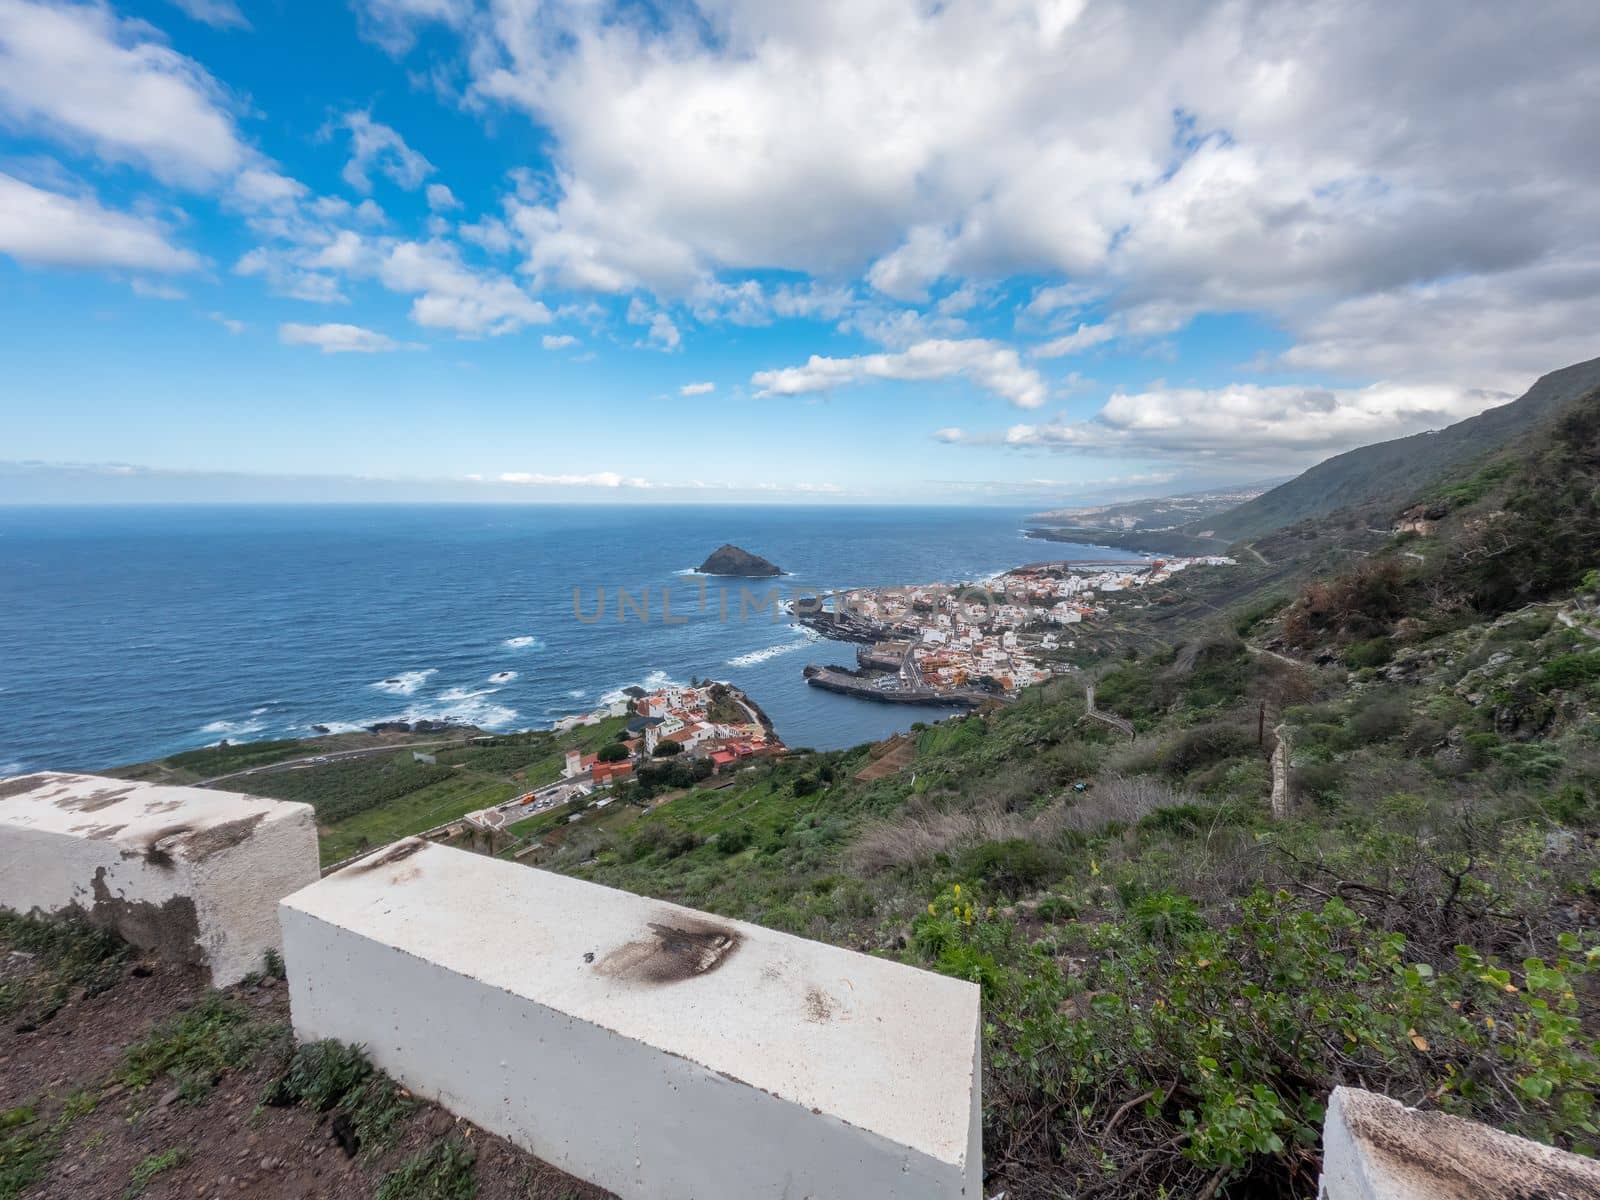 Top view of Garachico village from curved road in Tenerife